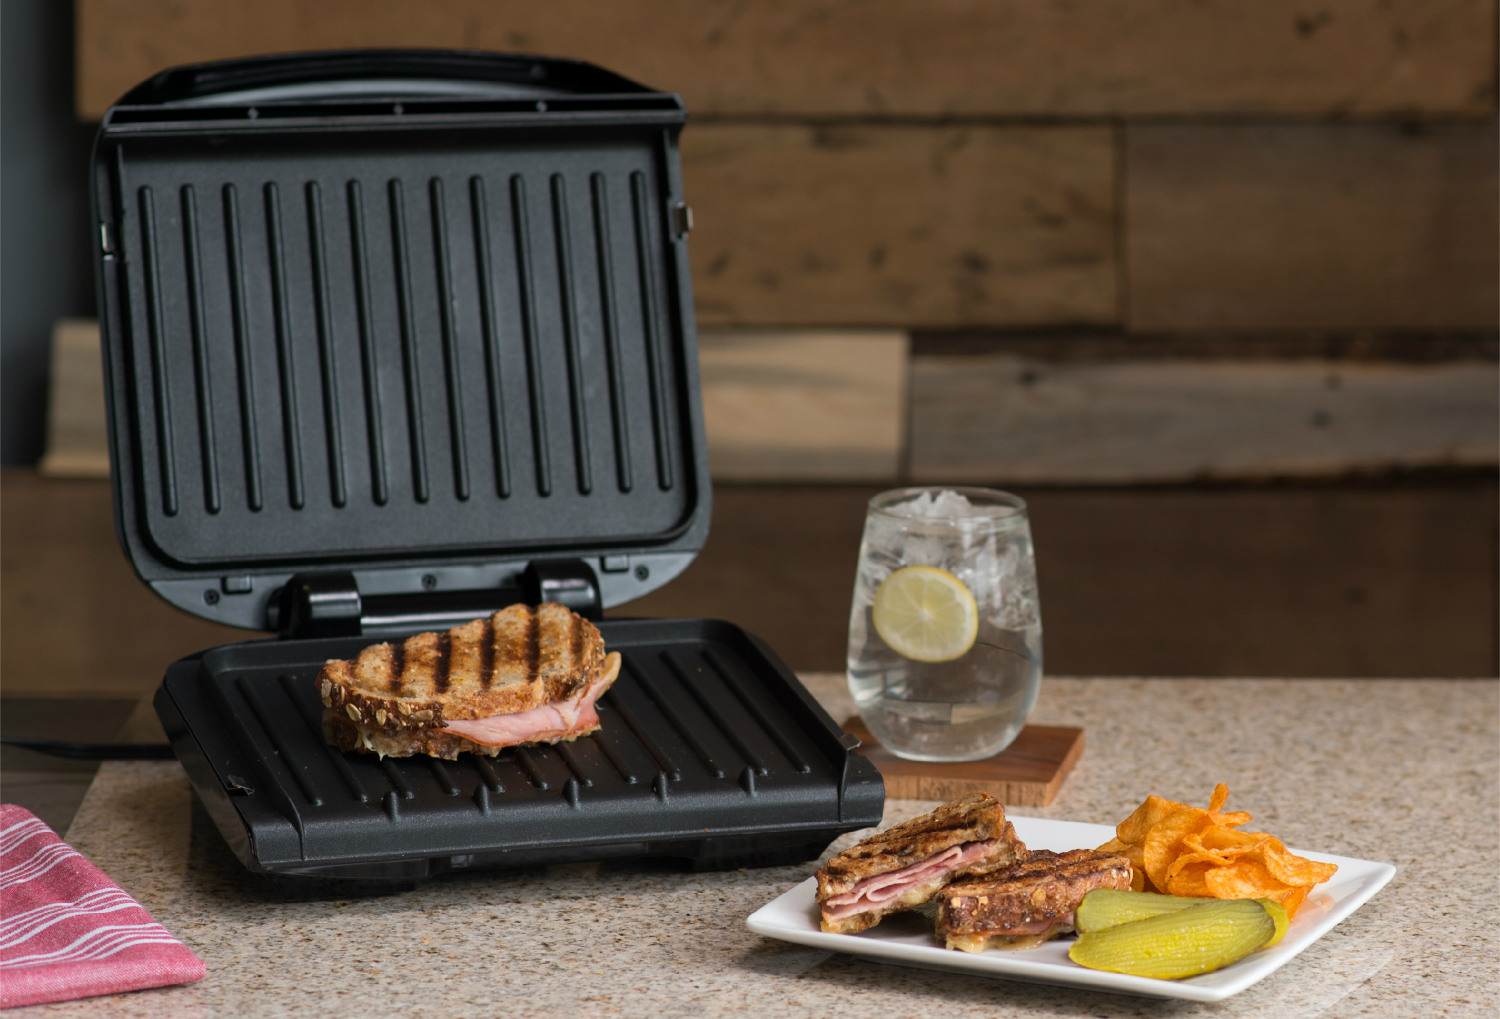 https://www.digitaltrends.com/wp-content/uploads/2019/05/george-foreman-4-serving-removable-plate-electric-grill-and-panini-press-2.jpg?fit=1500%2C1001&p=1